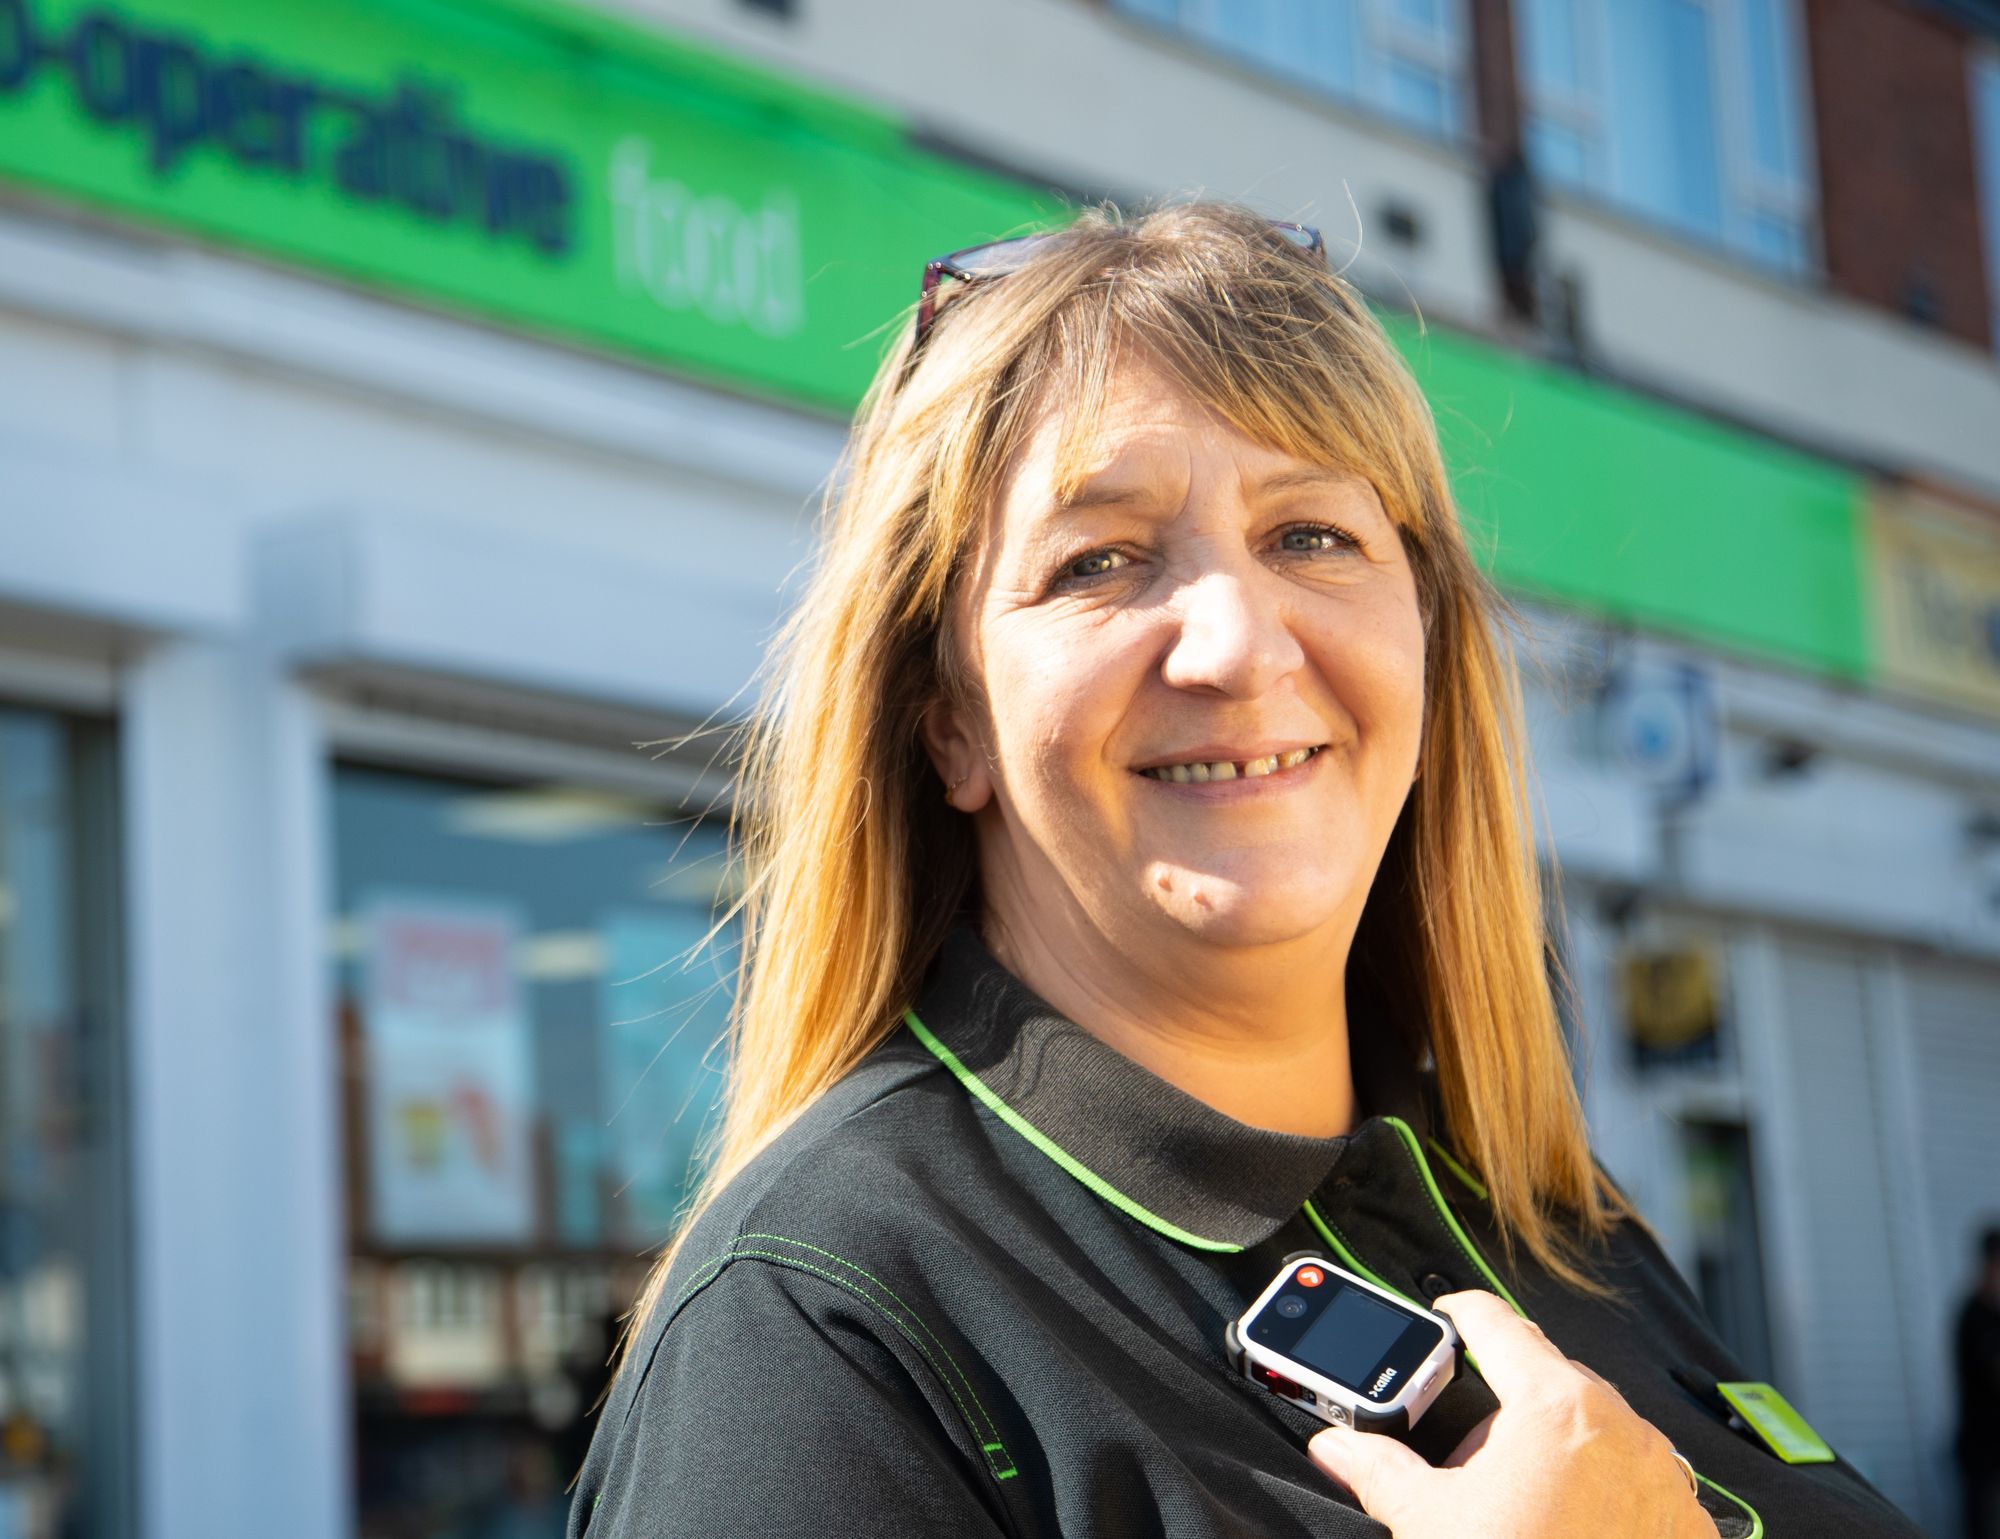 Central England Co-op extends roll out of body cams to keep colleagues and customers safe